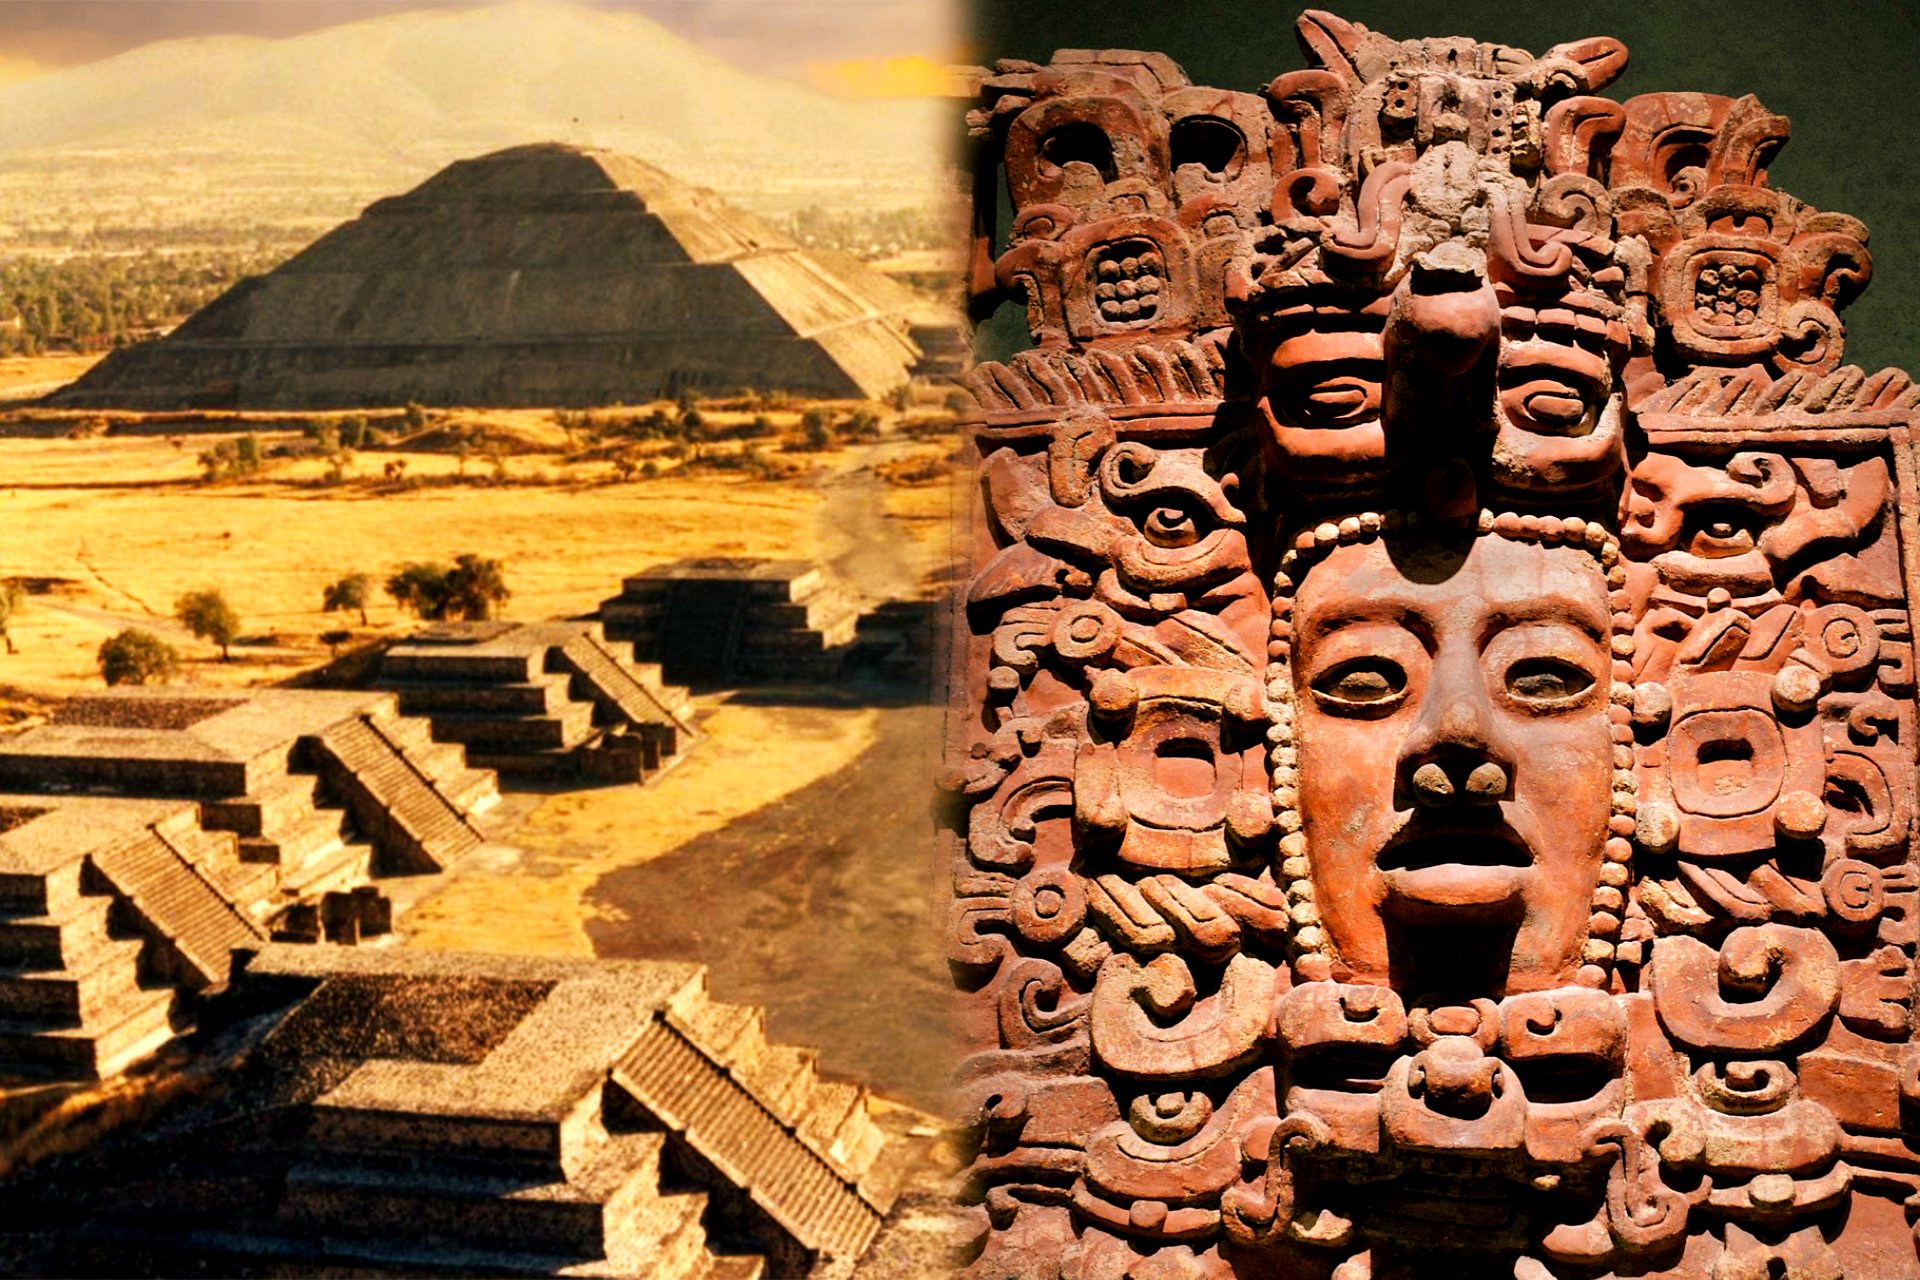 A collage of a photo of The Pyramid of the Sun, the grandest structure in Teotihuacan, Mexico and a photo of an ancient Maya temple decoration stone sculpture of a face with intricate details and patterns.